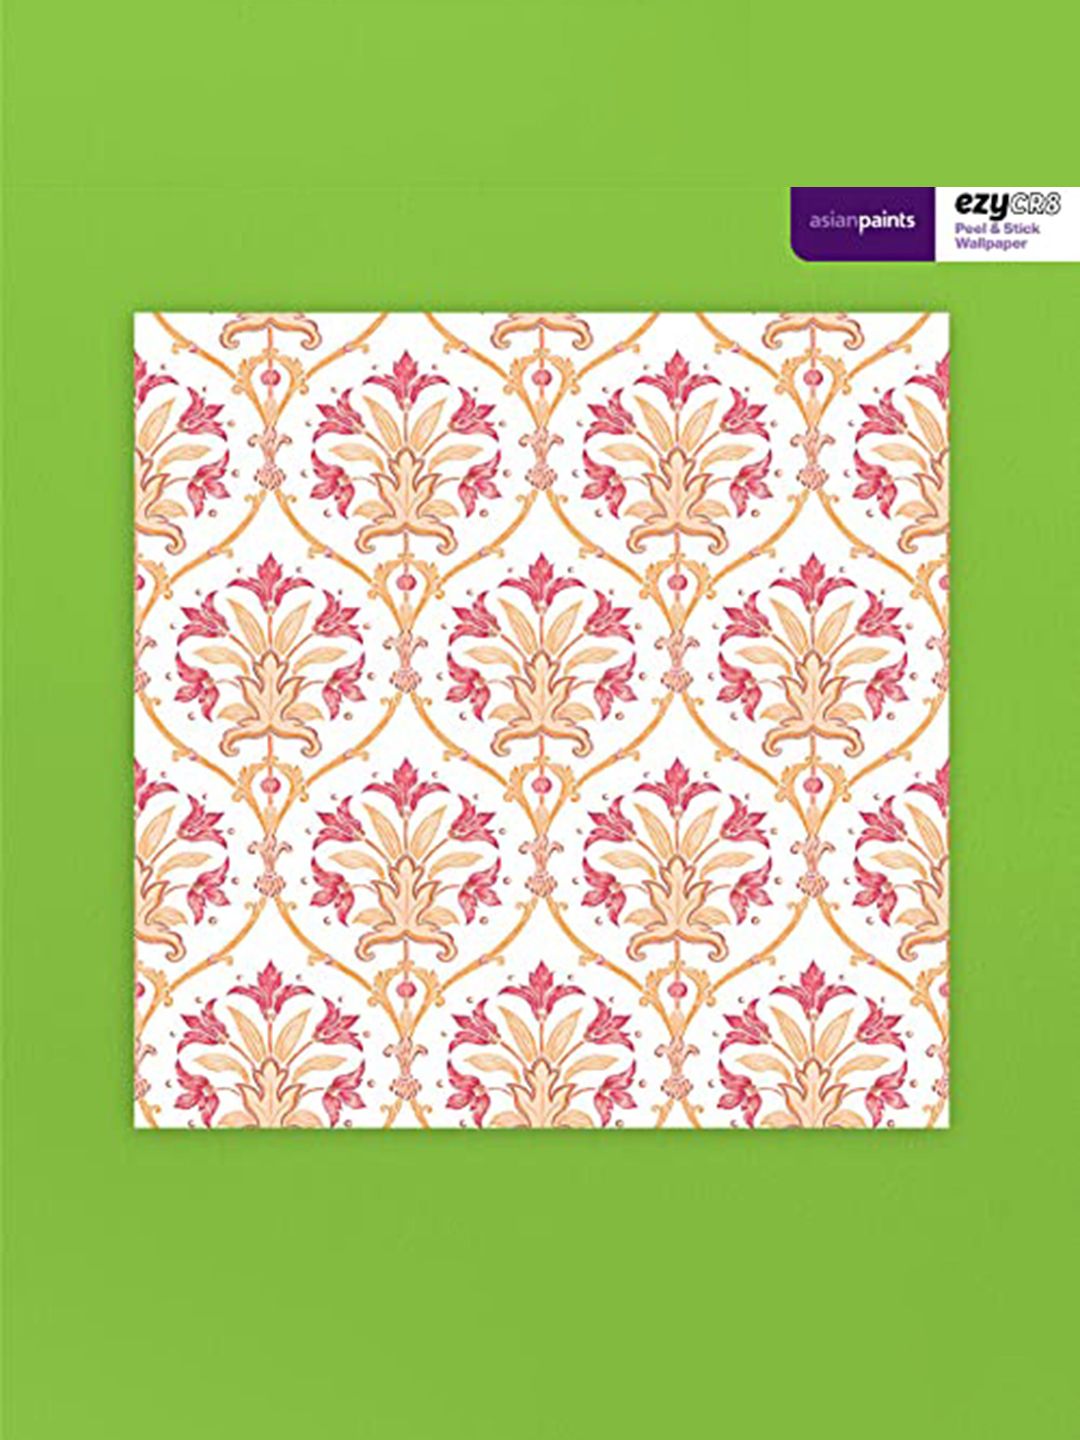 Asian Paints Orange EzyCR8 Victorian Floral Self Adhesive Wallpaper Price in India